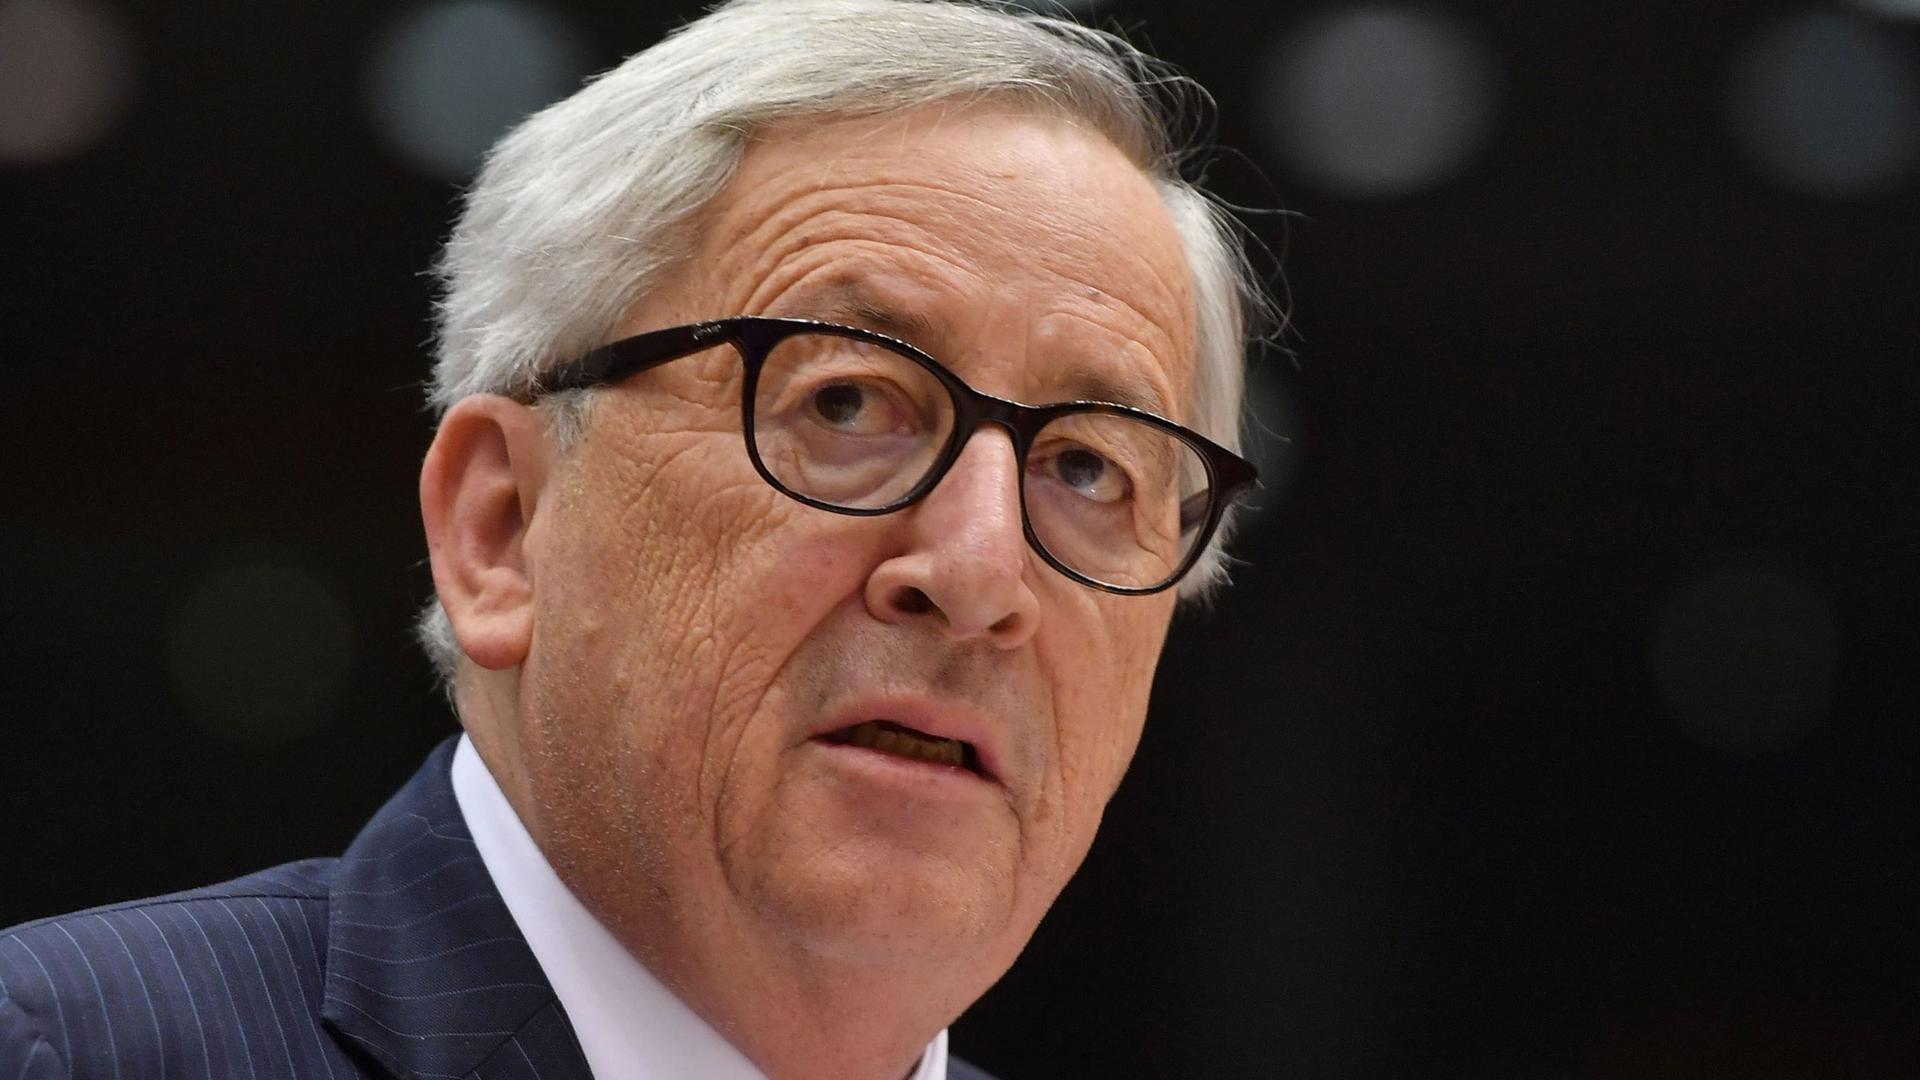 Jean-Claude Juncker was the country's Prime Minister from 1995 to 2013